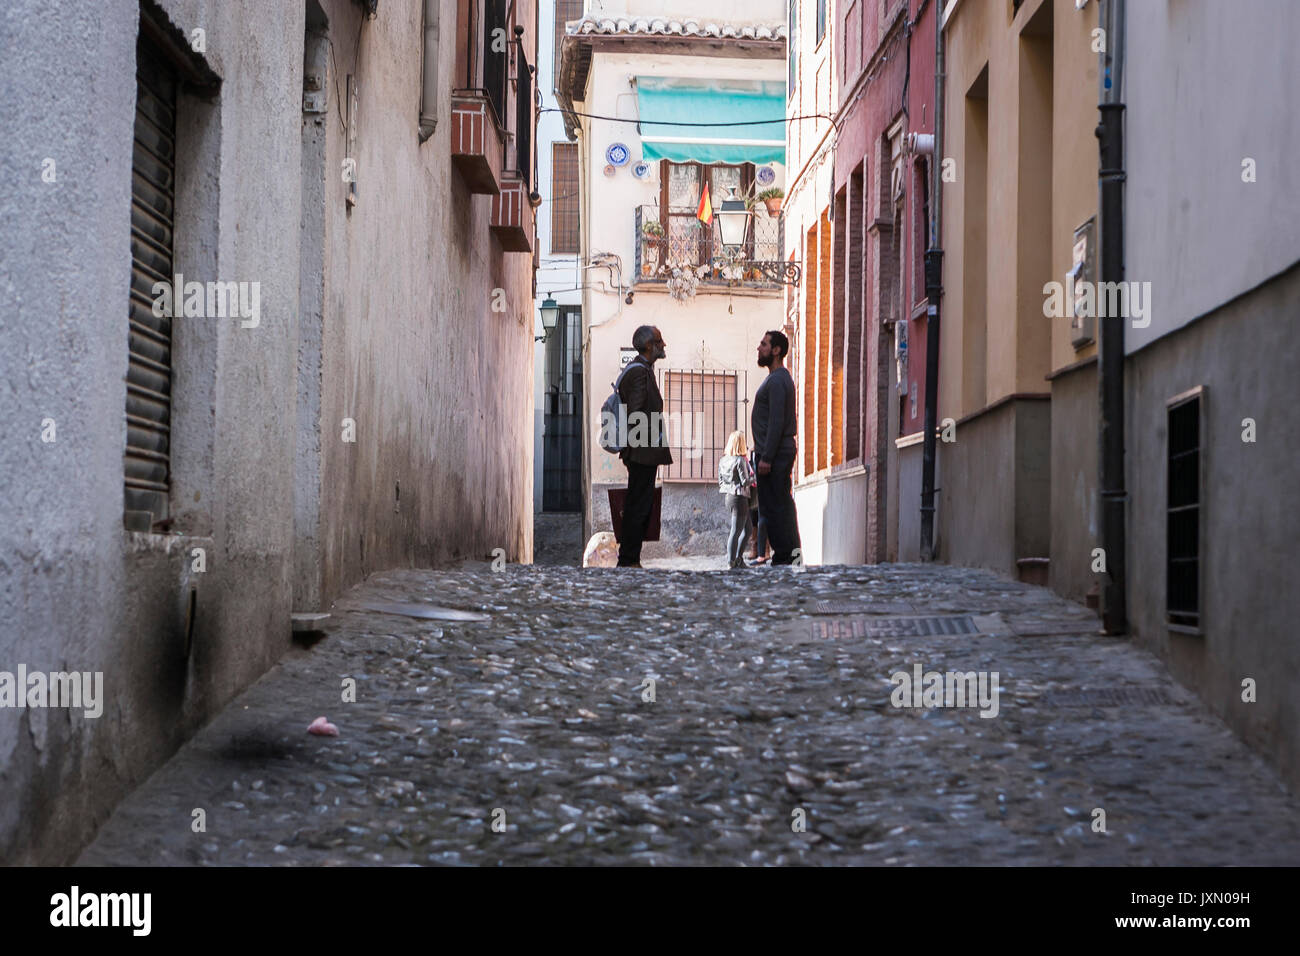 Two Moroccans speaking at the end of street in the Albaicín, Granada, Andalusia, Spain Stock Photo